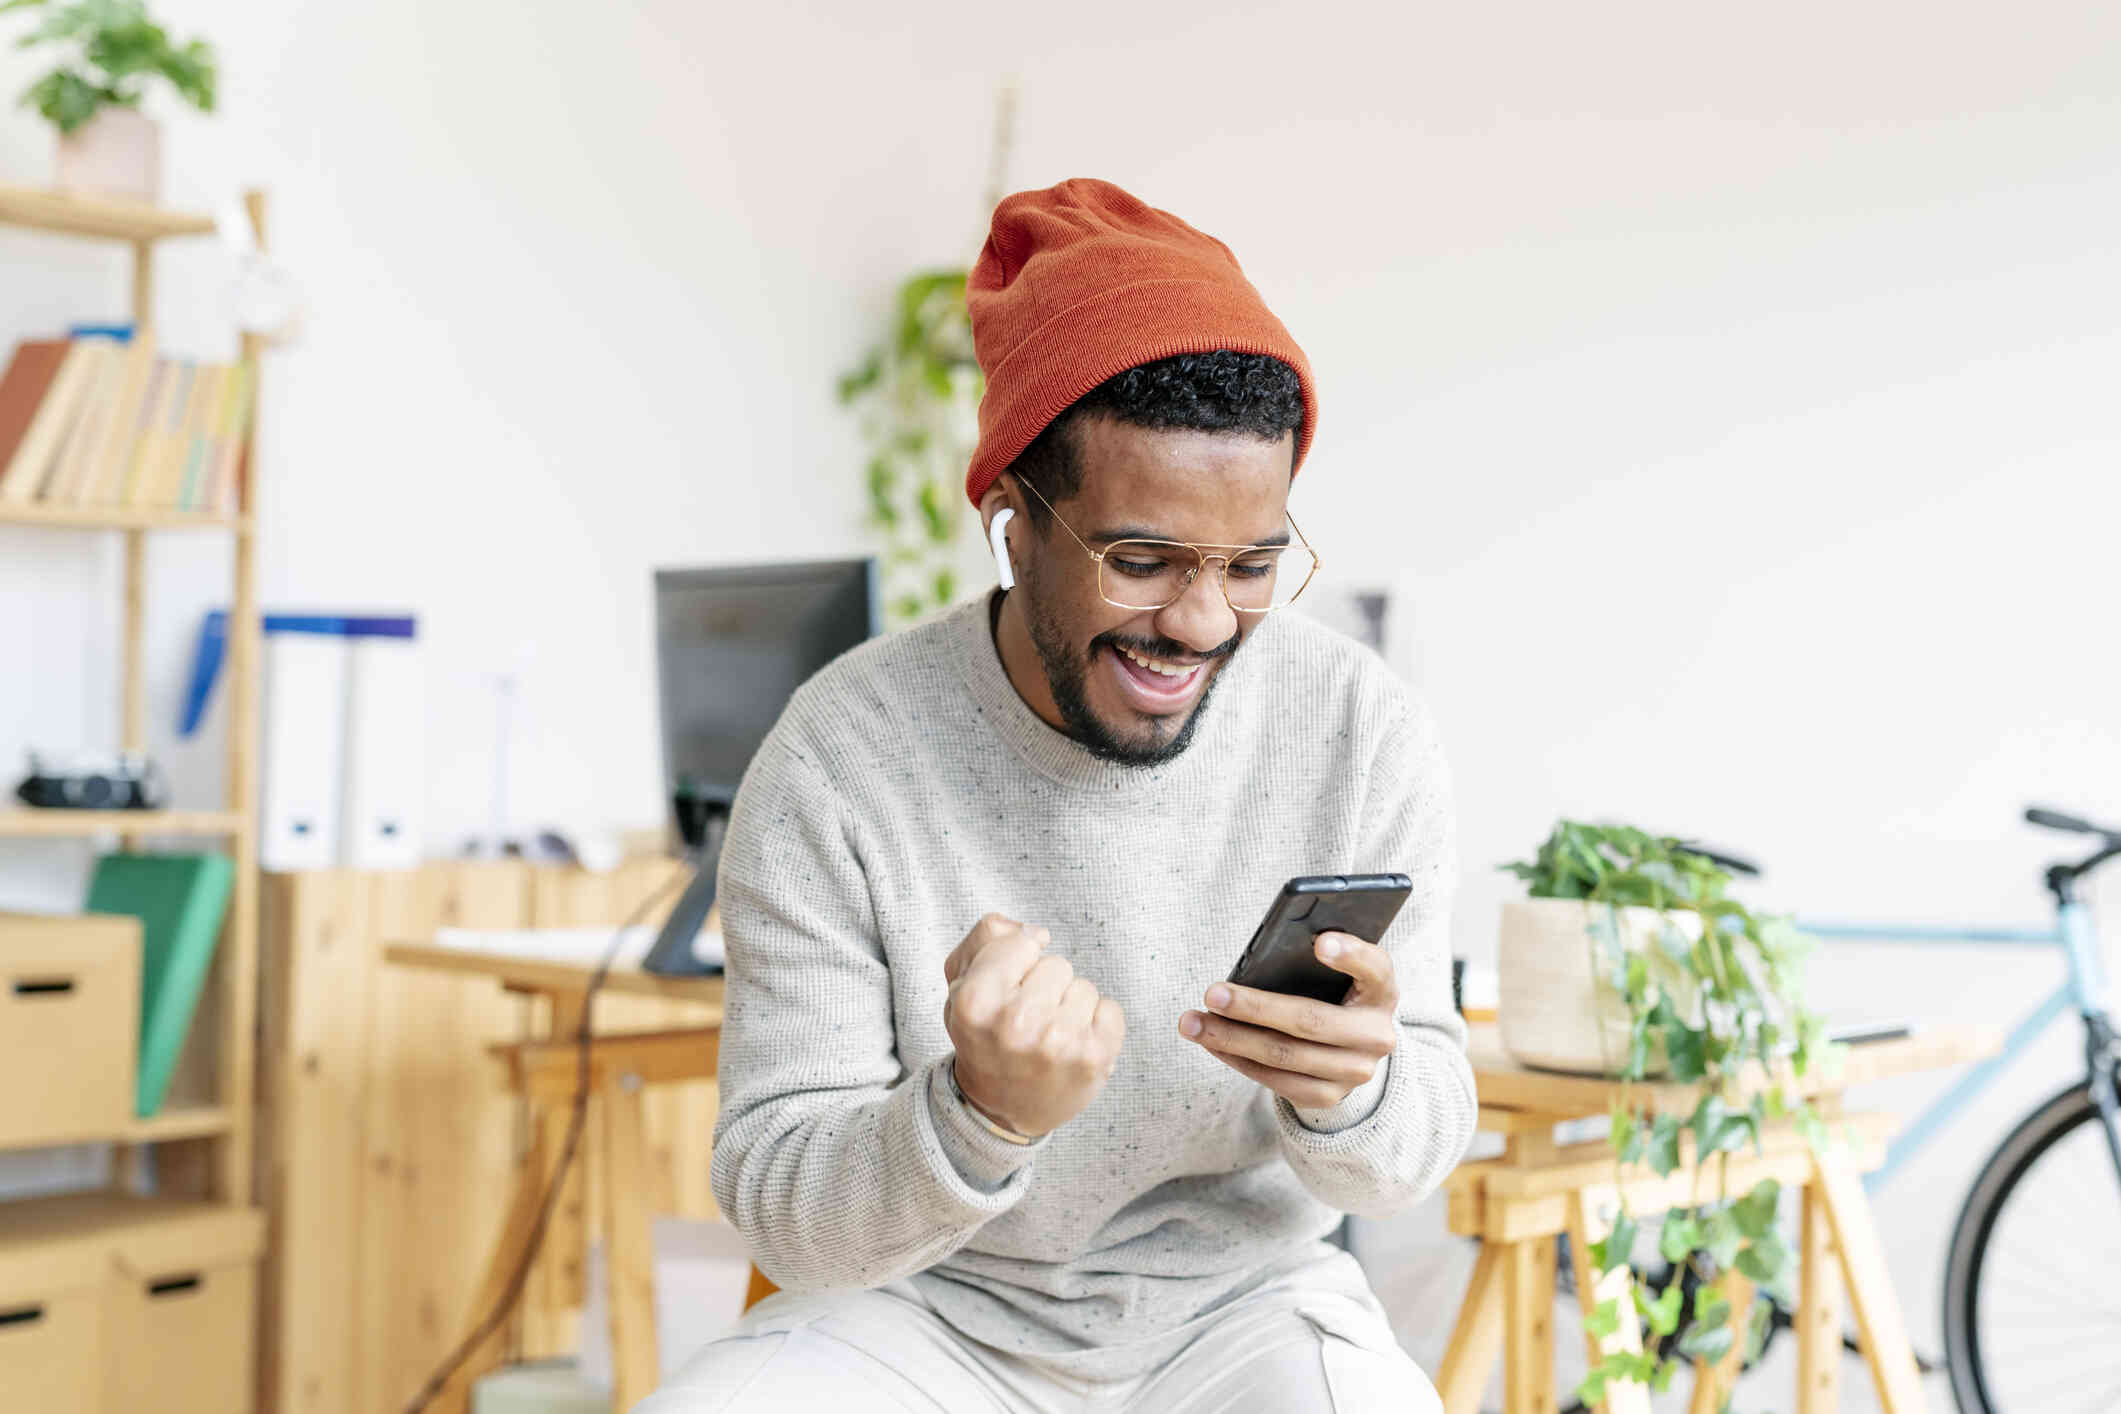 A man in an ornage beanie smiles brightly as he happily looks down at the cellphone in his hand.